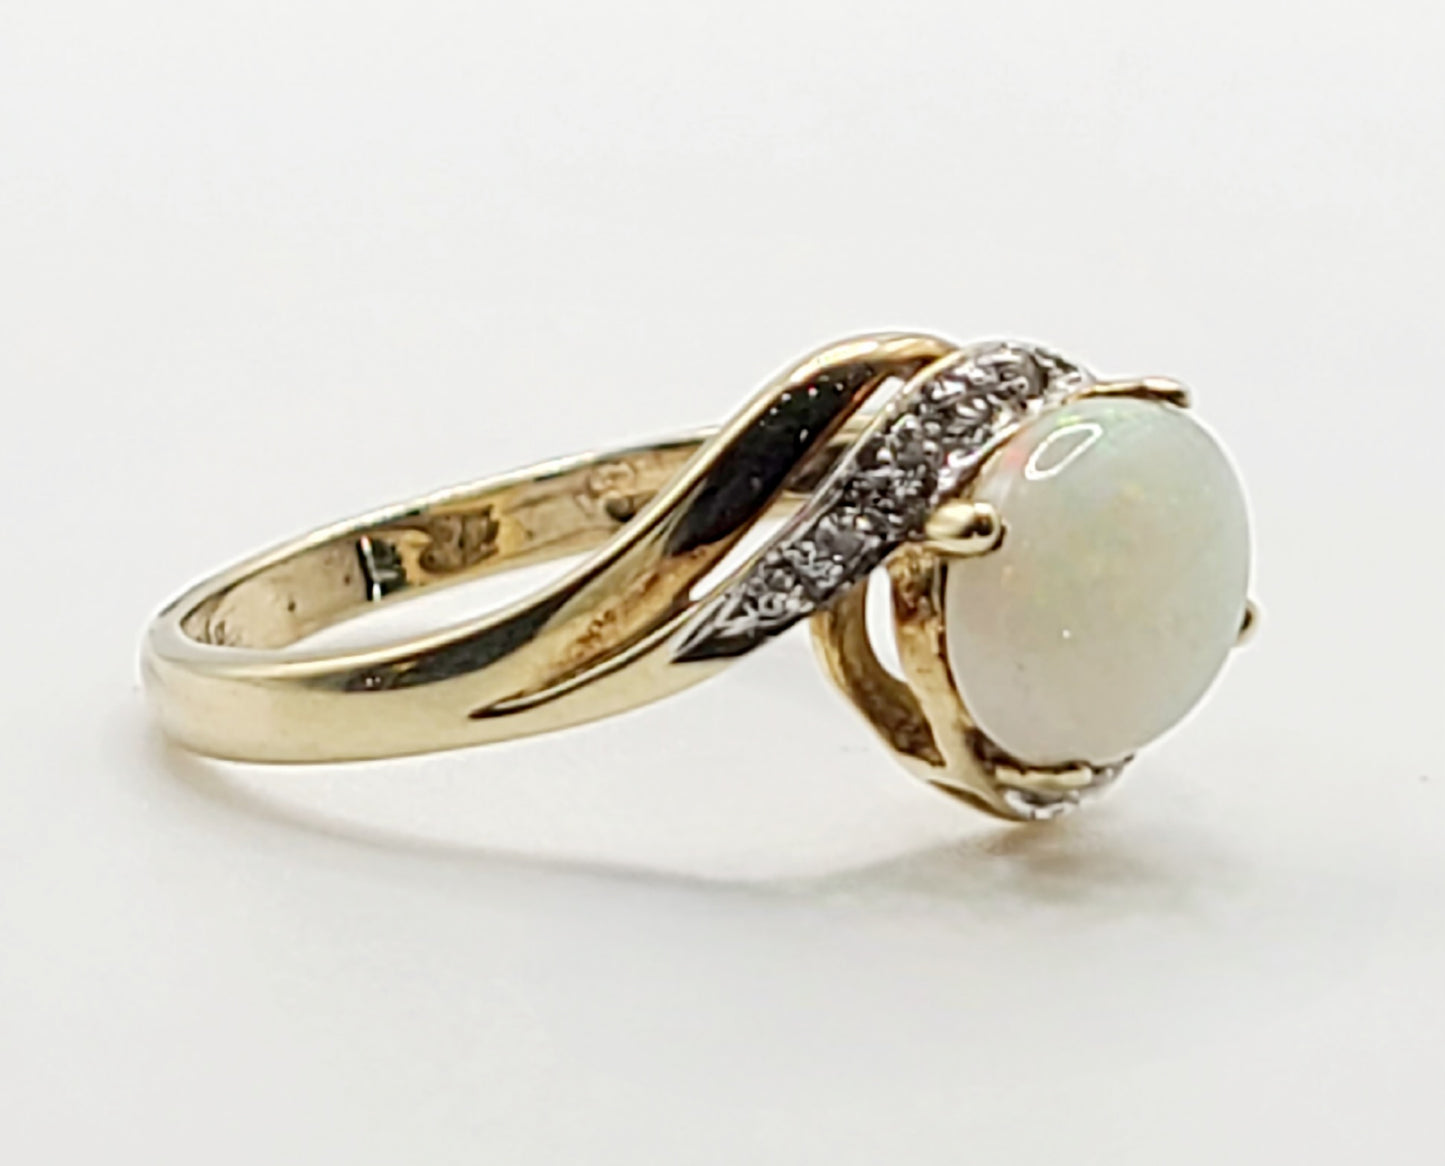 Vintage Oval Cut Opal with Diamond Accents on 9ct Gold Ring Size P1/2